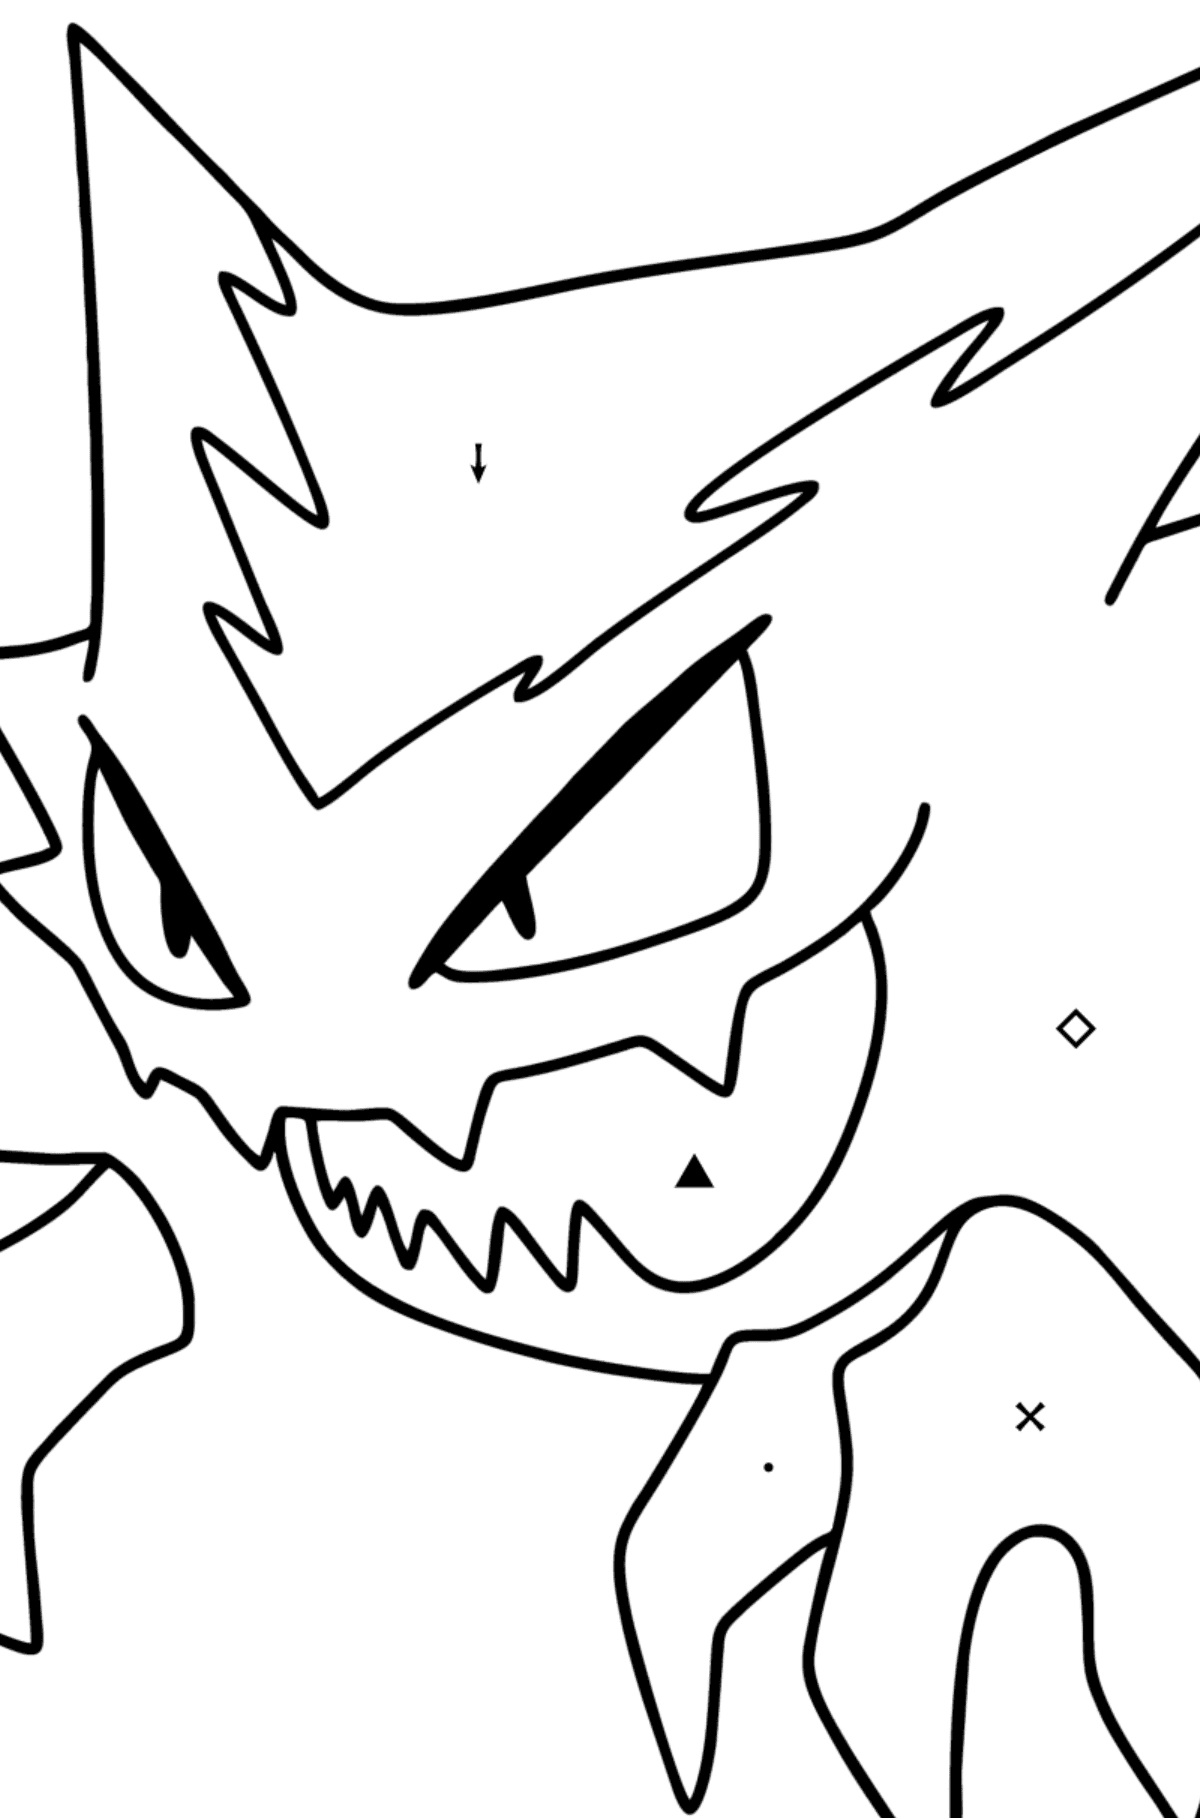 Pokémon Go Haunter coloring page - Coloring by Symbols for Kids